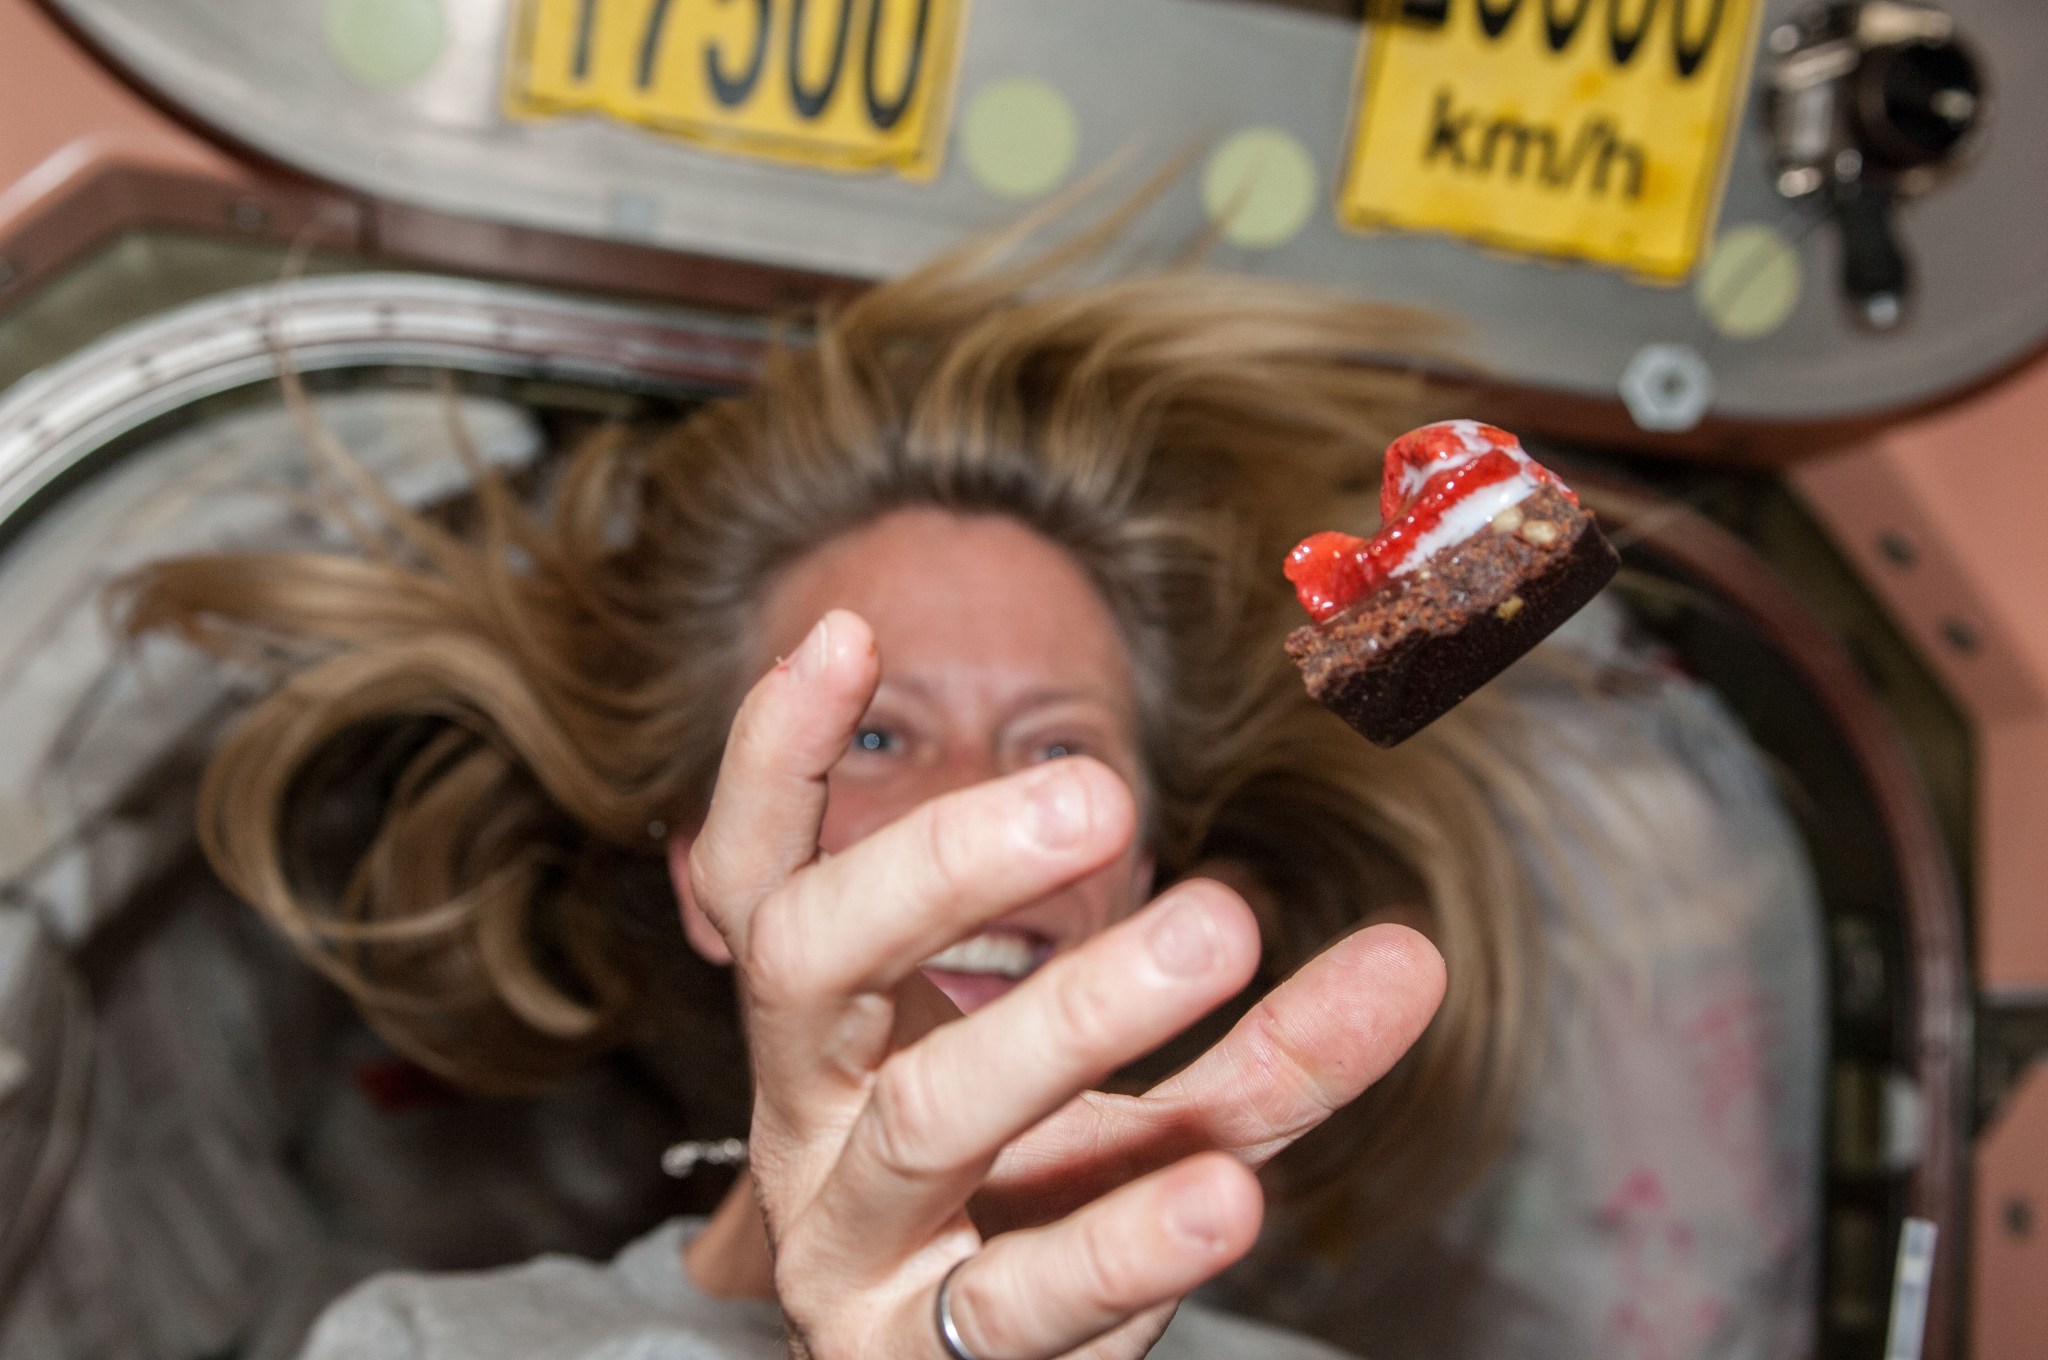 NASA Astronaut floats a piece of food in front of her